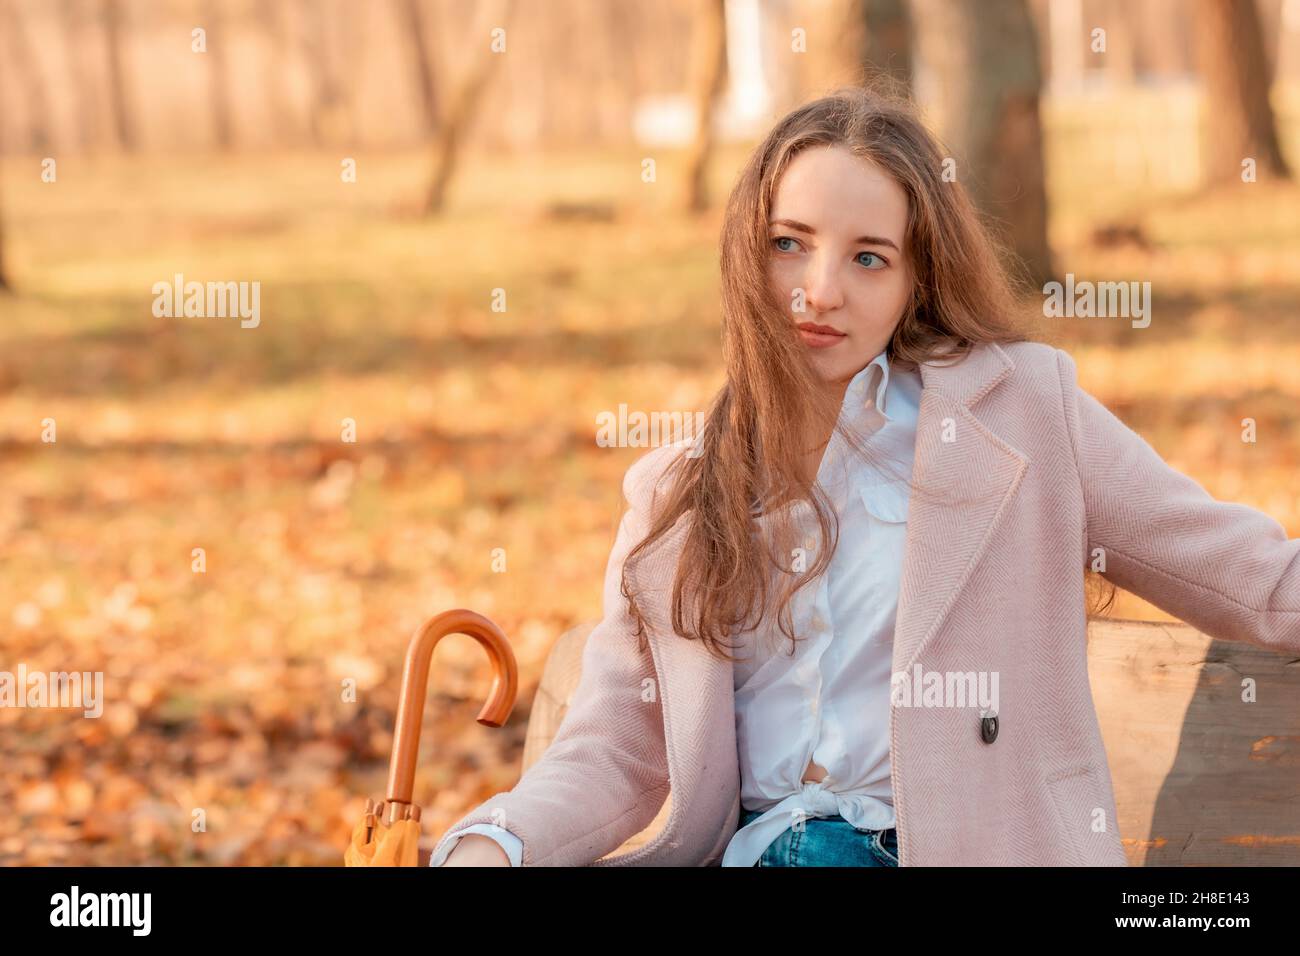 A girl alone sits with an umbrella in her hands on a bench in an autumn park Stock Photo